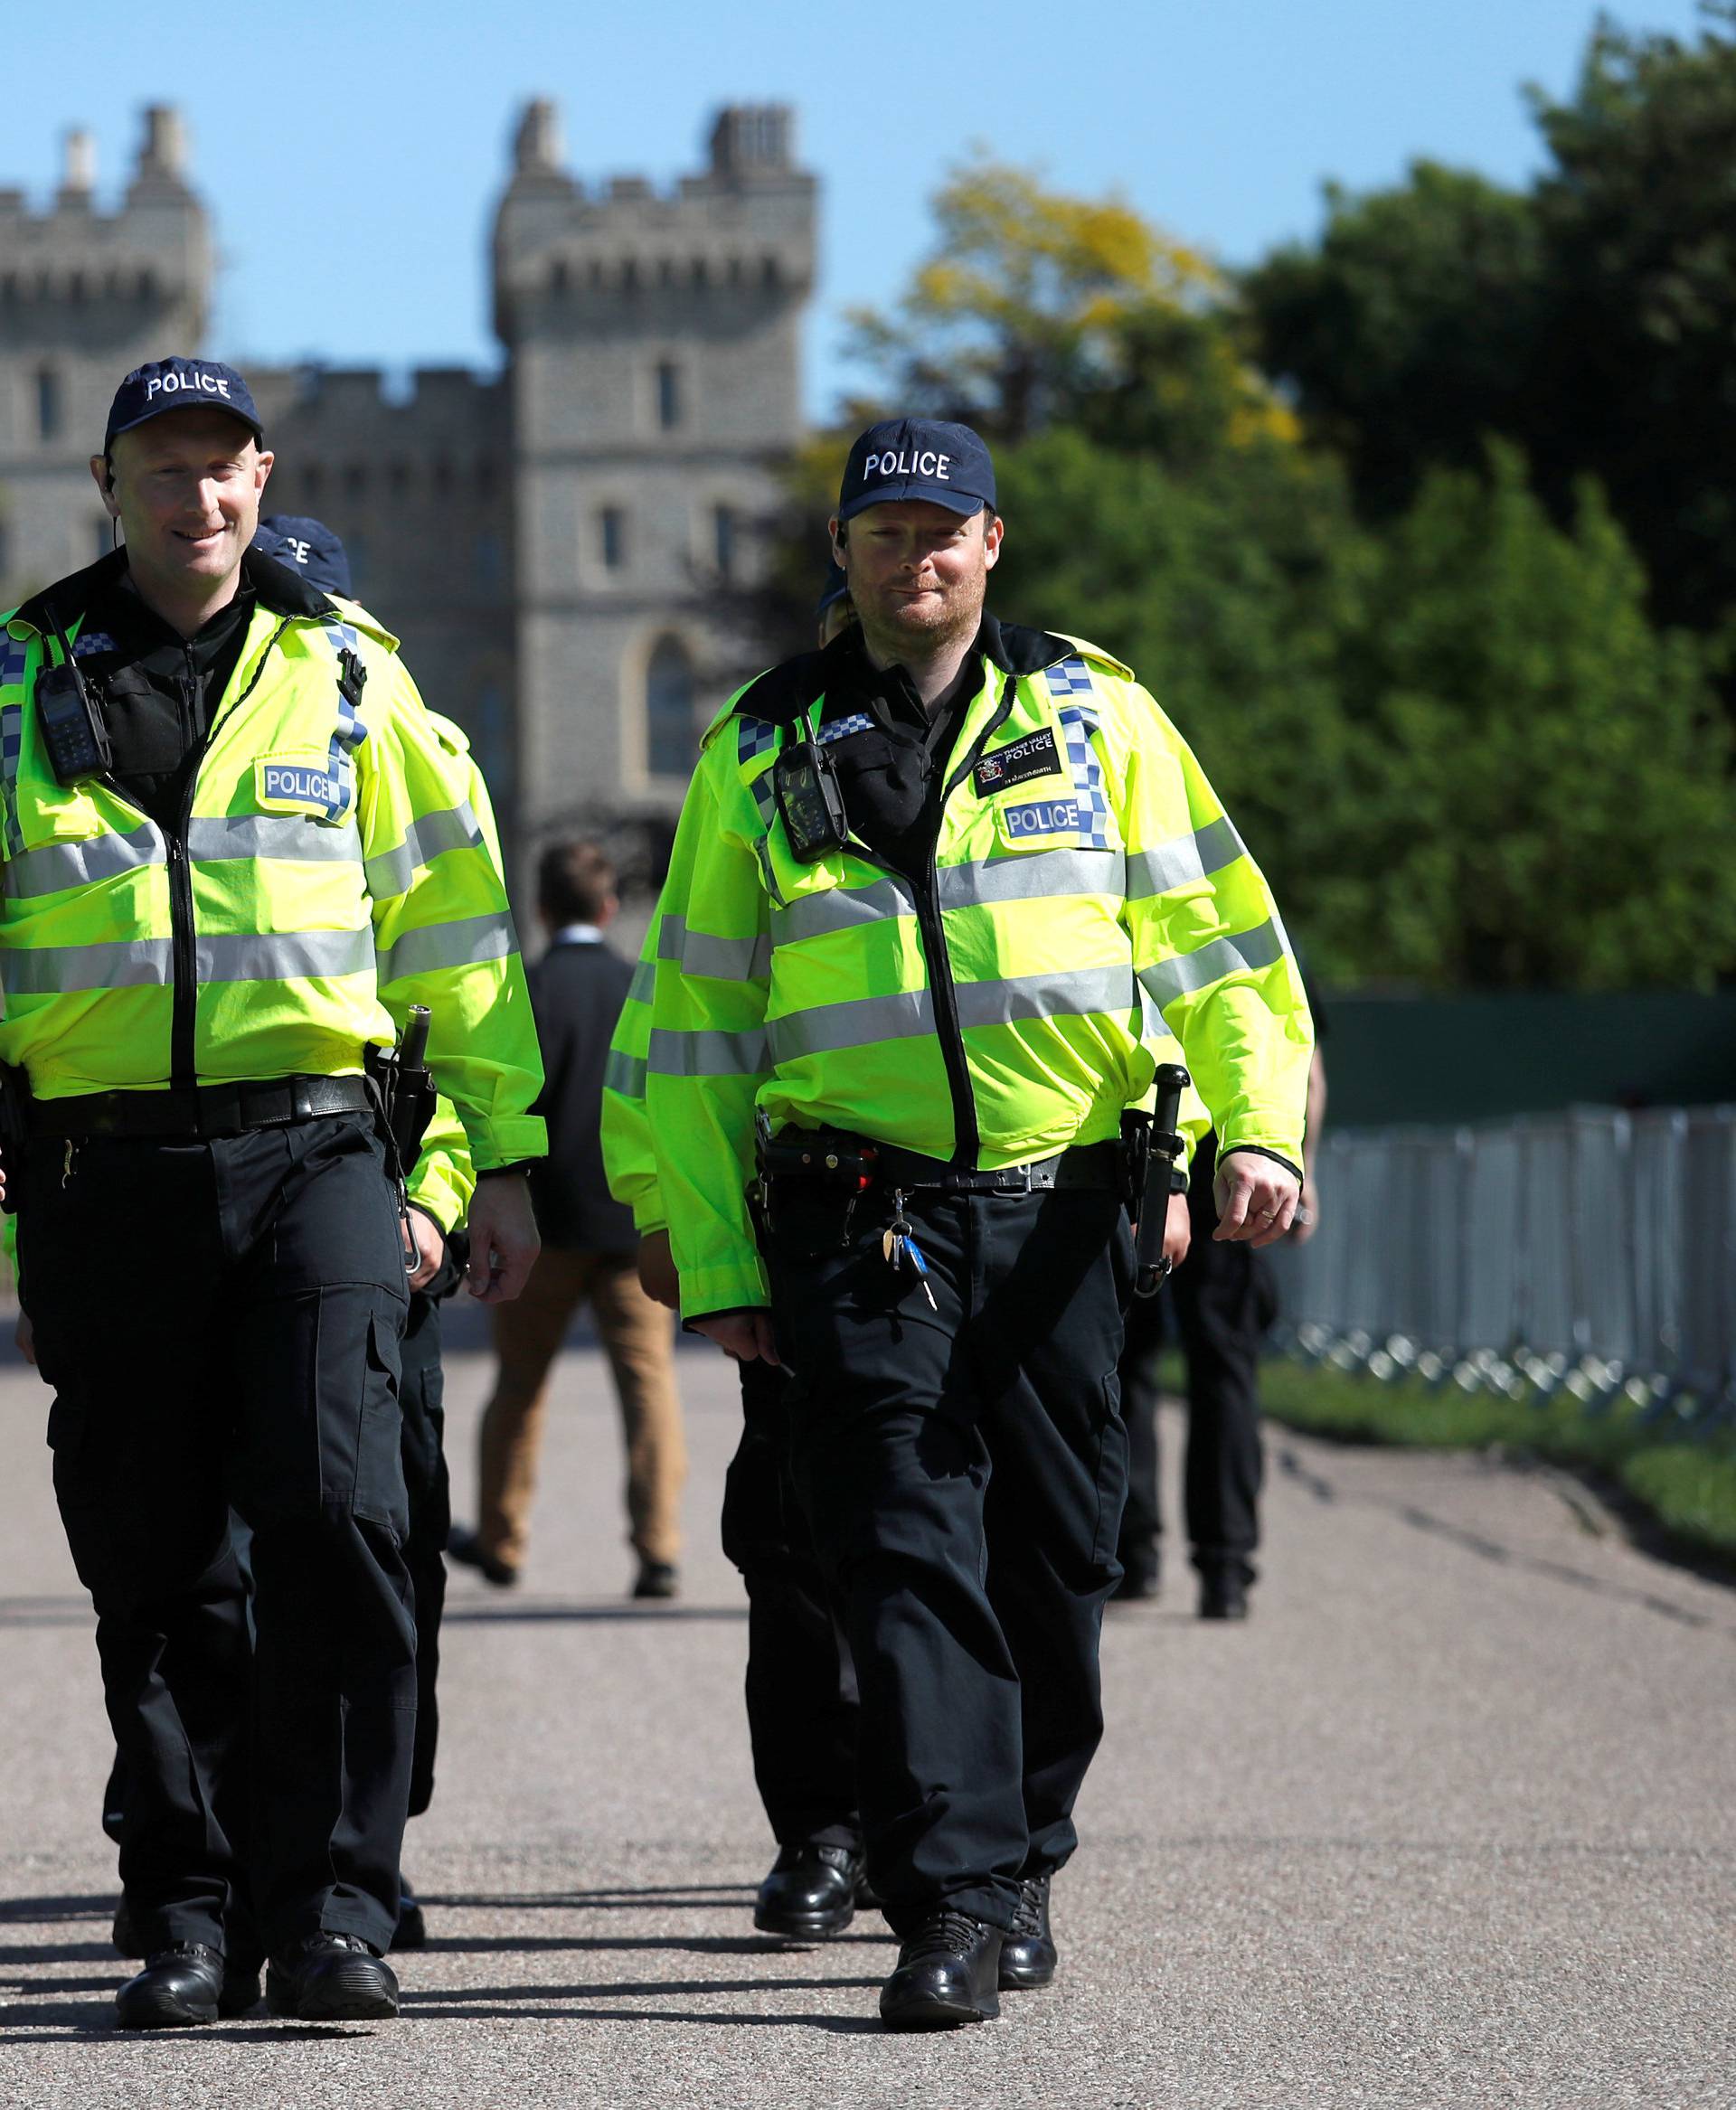 Police officers walk down Long Walk leading away from Windsor Castle before the upcoming wedding of Britain's Prince Harry and Meghan Markle in Windsor